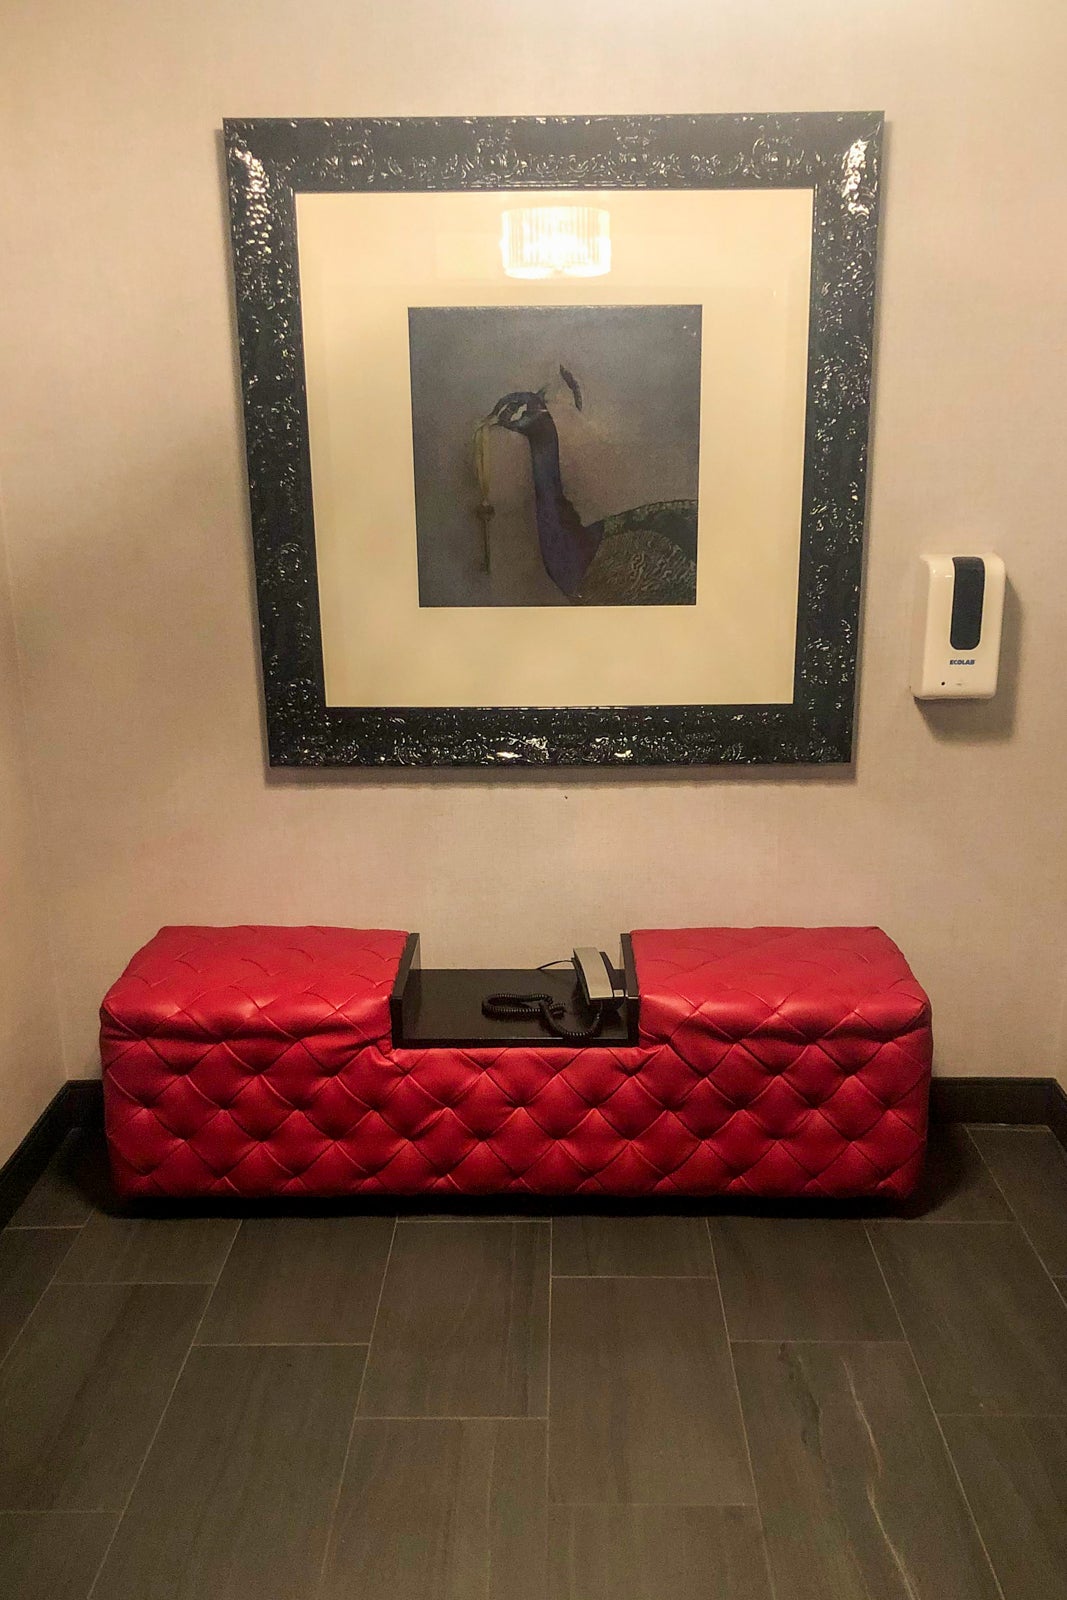 A seating area and photo of a peacock with a key in its mouth. Decor outside of the elevator on the 8th floor of The Clancy hotel.